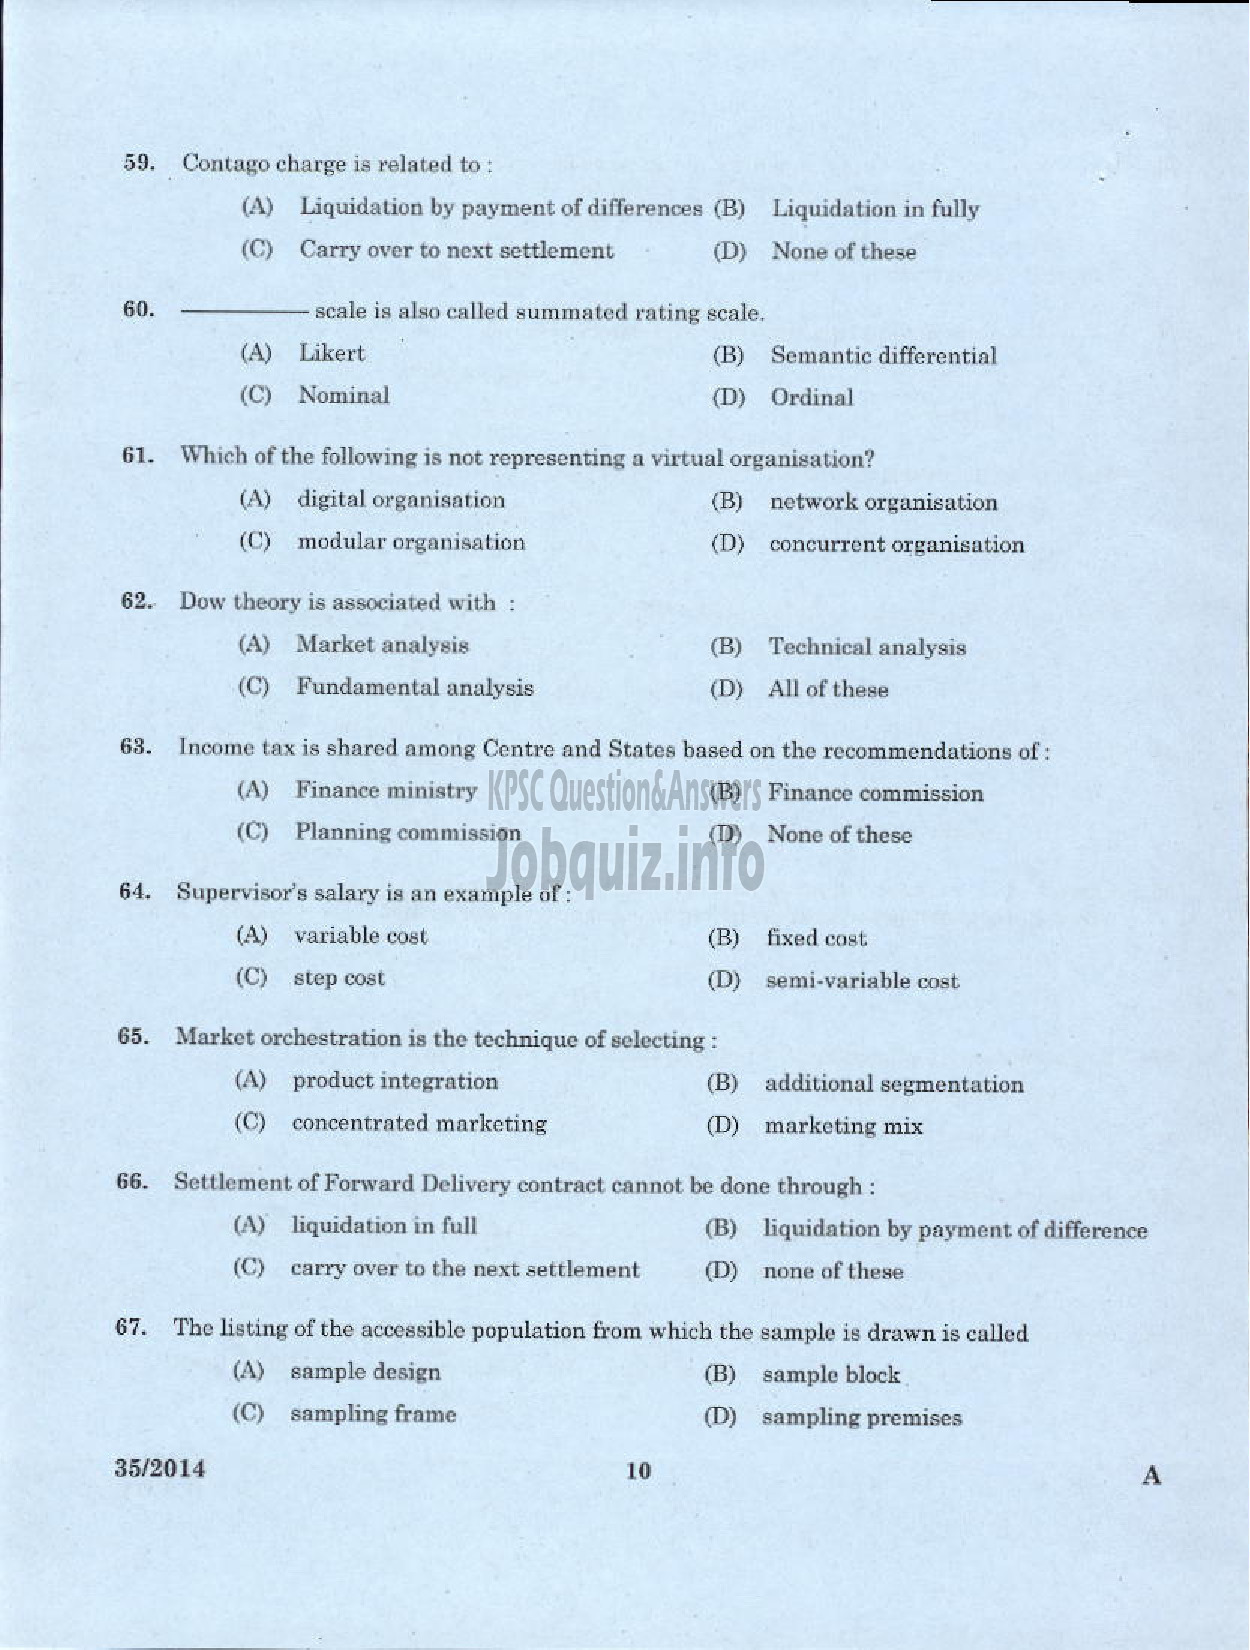 Kerala PSC Question Paper - JUNIOR ASSISTANT ACCOUNTS SR FOR ST ONLY TRAVANCORE COCHIN CHEMICALS LIMITED-8